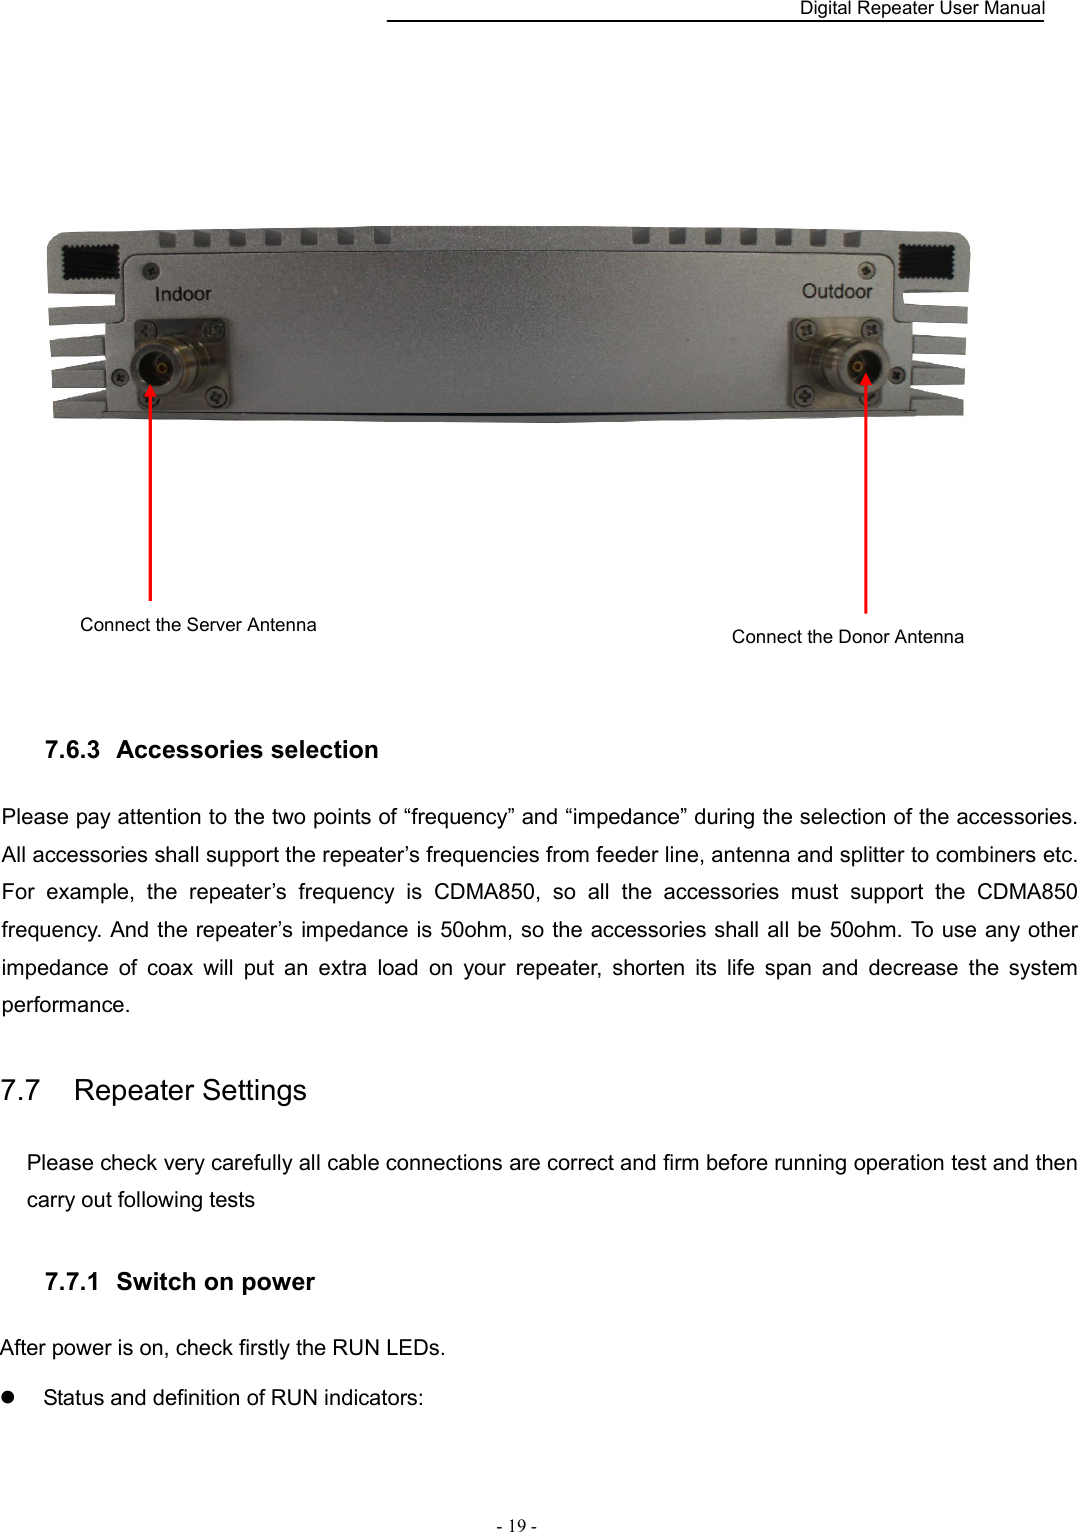    Digital Repeater User Manual  - 19 -    7.6.3   Accessories selection Please pay attention to the two points of “frequency” and “impedance” during the selection of the accessories. All accessories shall support the repeater’s frequencies from feeder line, antenna and splitter to combiners etc. For  example,  the  repeater’s  frequency  is  CDMA850,  so  all  the  accessories  must  support  the  CDMA850 frequency. And the repeater’s impedance is 50ohm, so the accessories shall all be 50ohm. To use any other impedance  of  coax  will  put  an  extra  load  on  your  repeater,  shorten  its  life  span  and  decrease  the  system performance. 7.7    Repeater Settings Please check very carefully all cable connections are correct and firm before running operation test and then carry out following tests 7.7.1   Switch on power After power is on, check firstly the RUN LEDs.   Status and definition of RUN indicators: Connect the Server Antenna Connect the Donor Antenna 